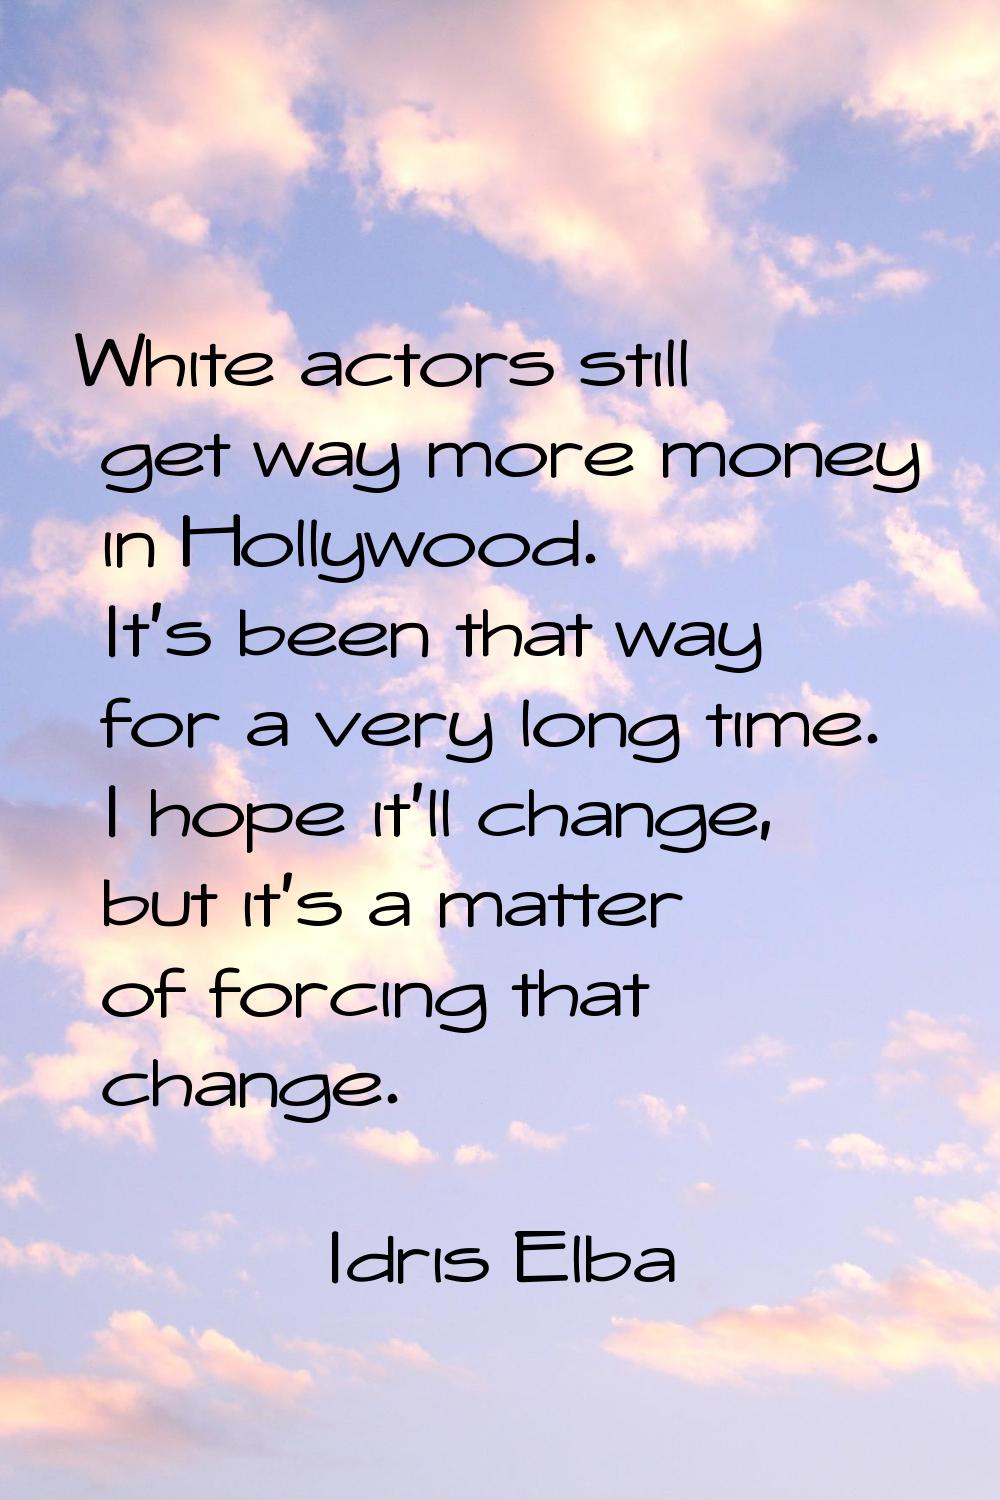 White actors still get way more money in Hollywood. It's been that way for a very long time. I hope